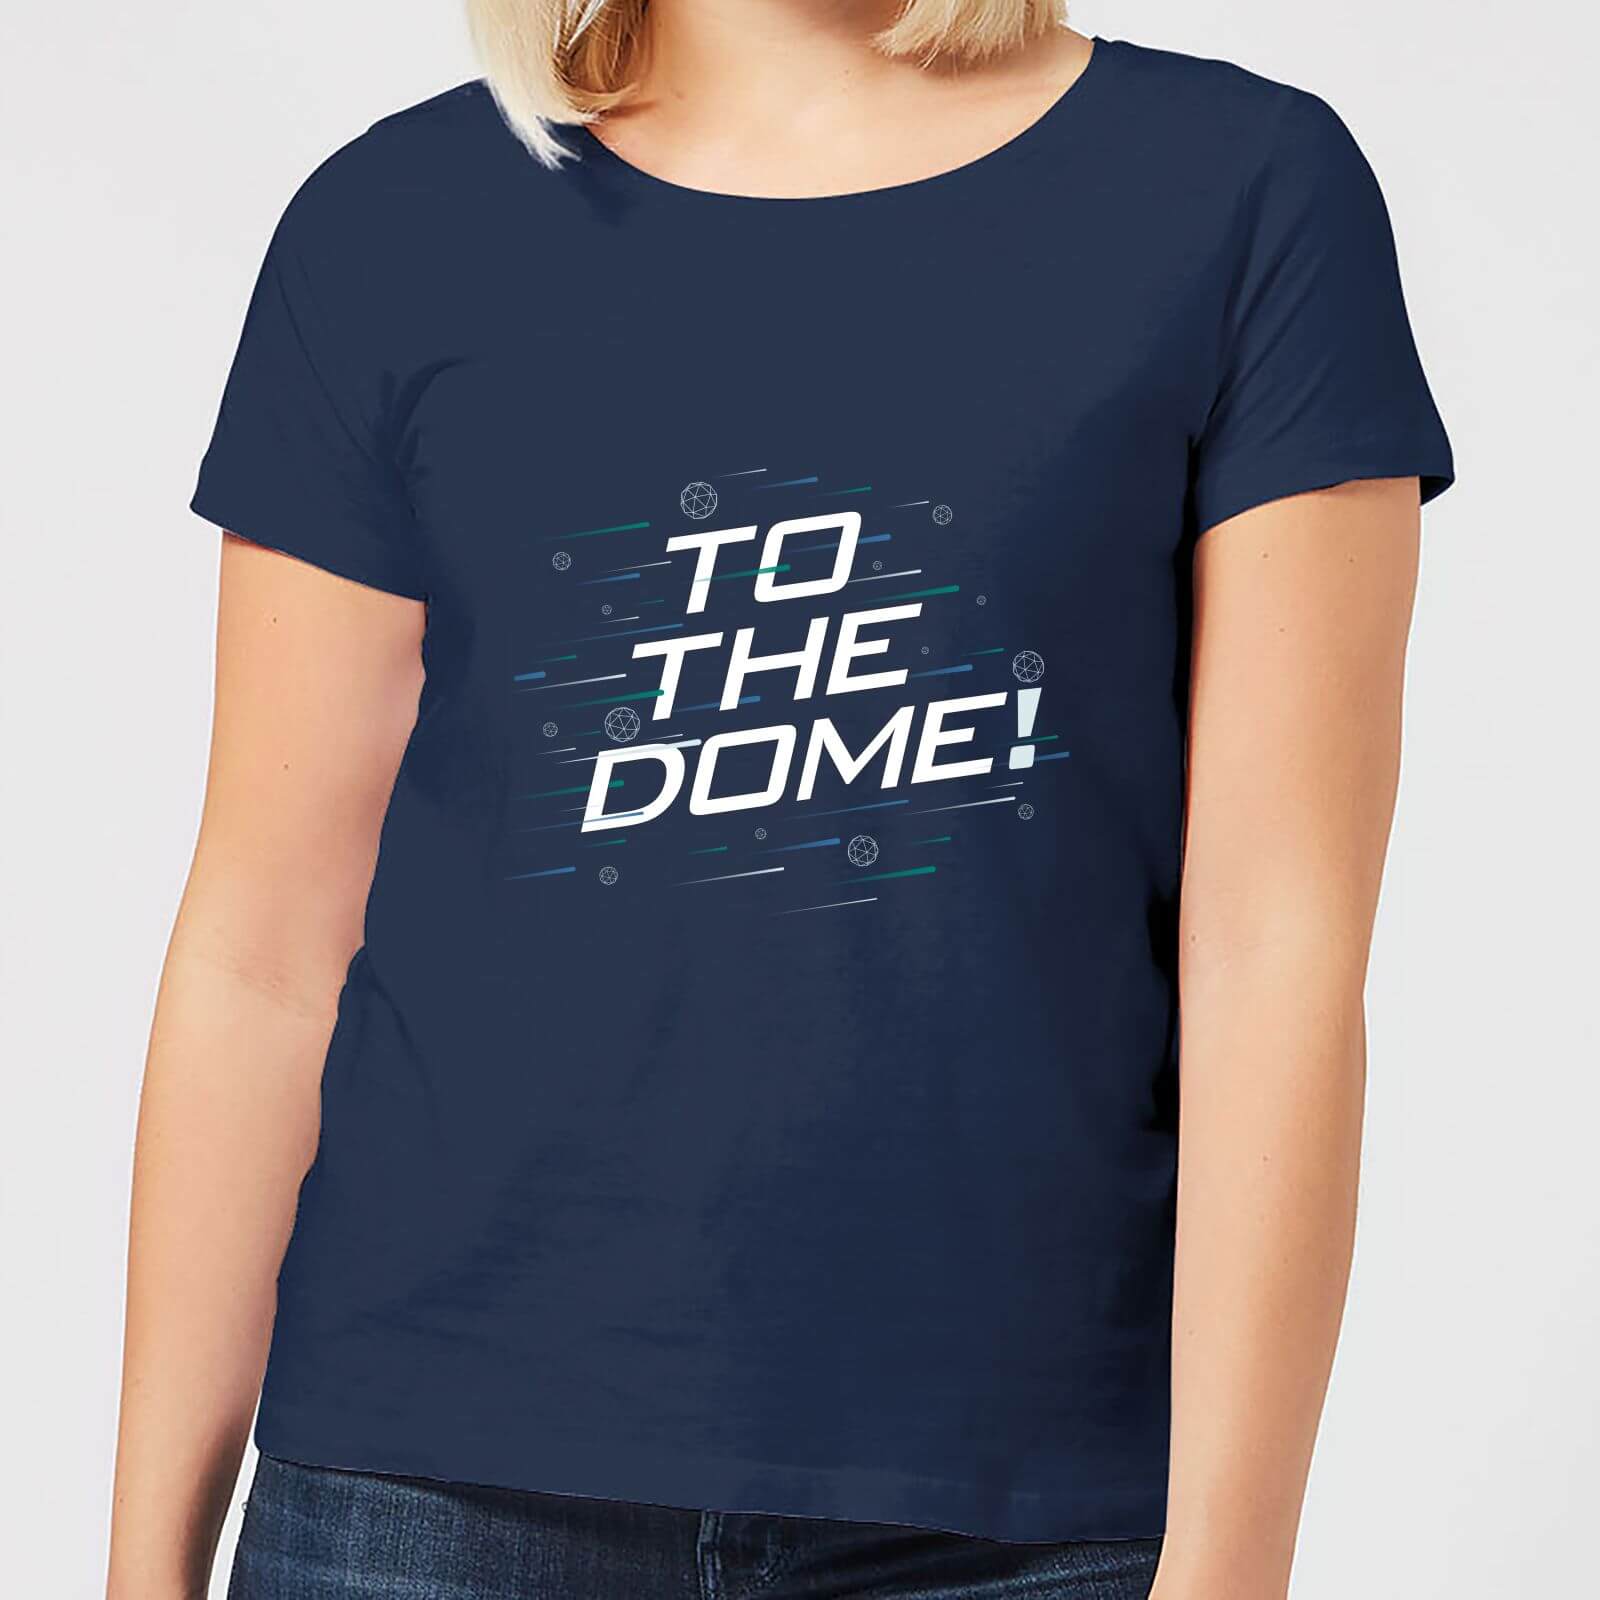 Crystal Maze To The Dome! Women's T-Shirt - Navy - S - Navy